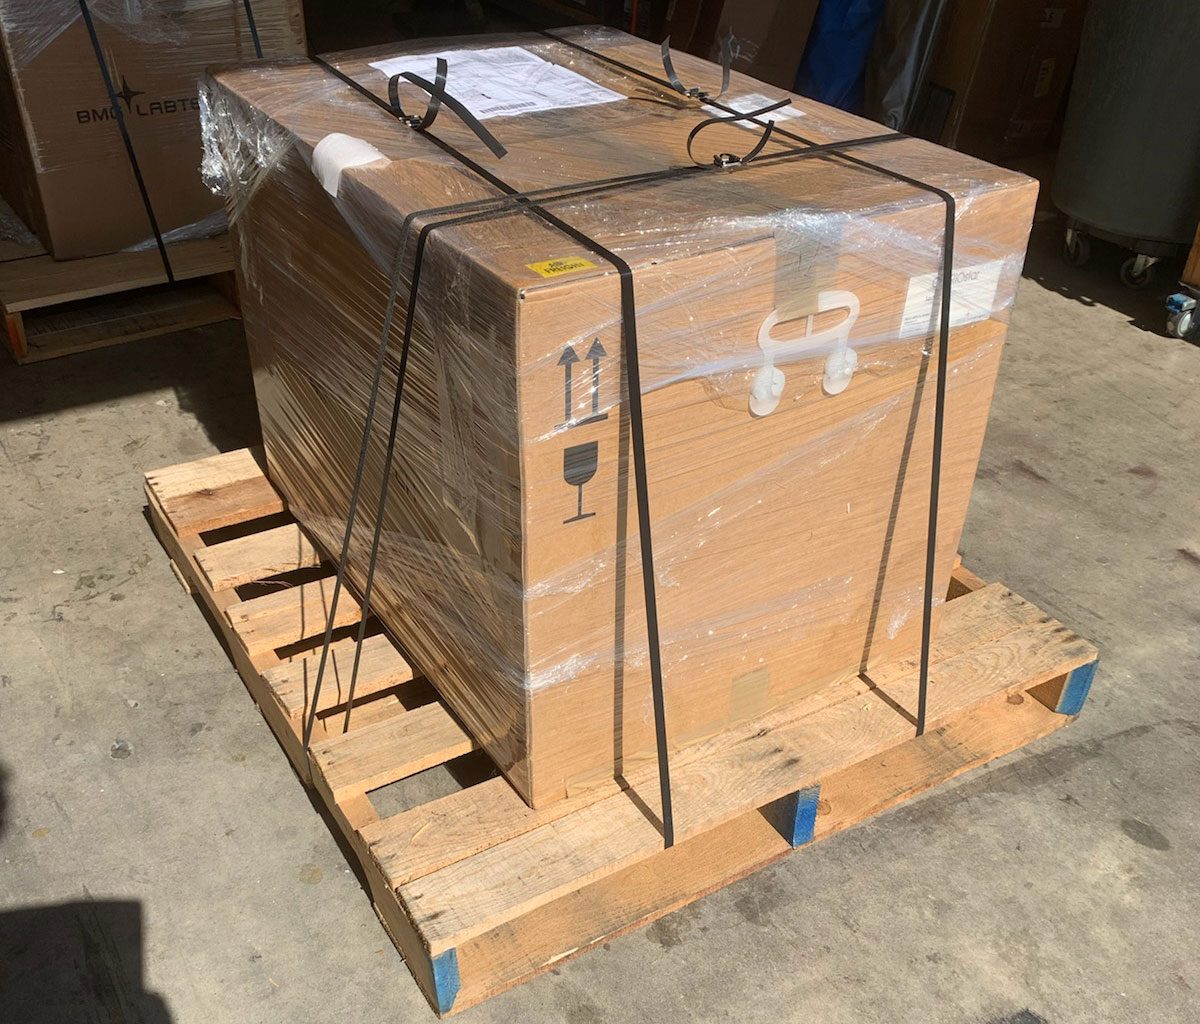 Shipping With Freight Boxes